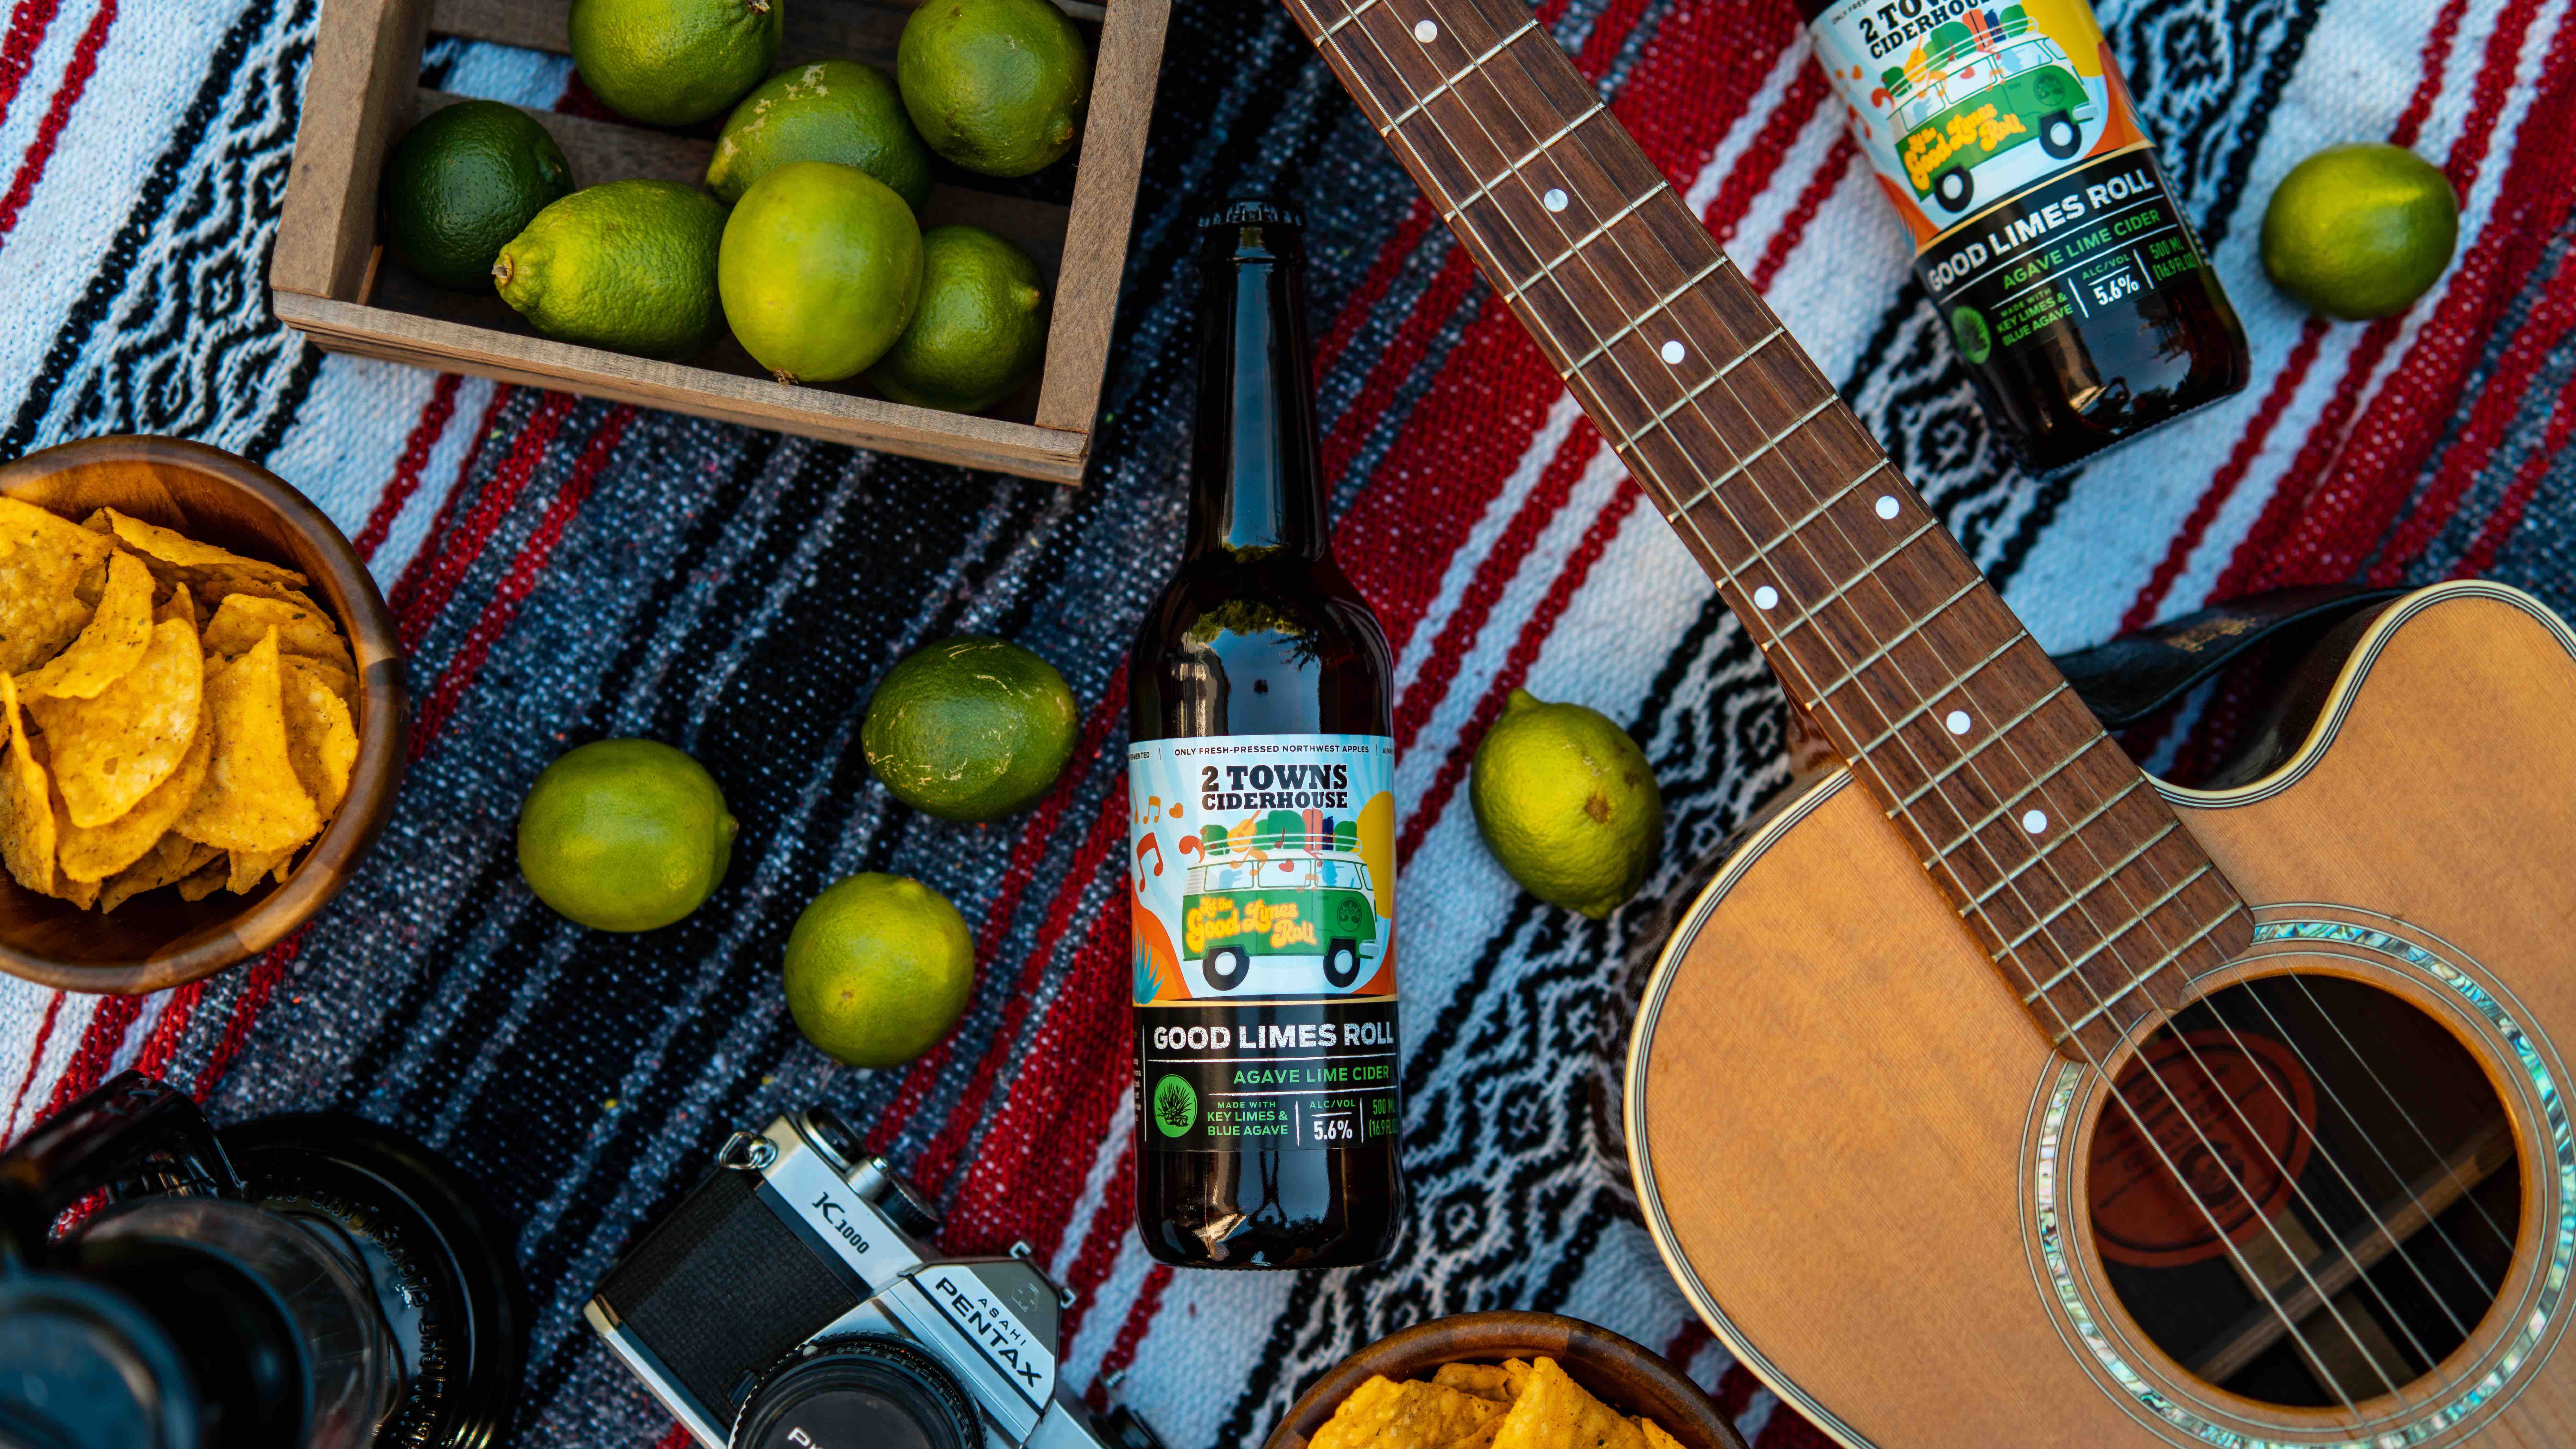 image of Good Limes Roll Agave Lime Cider courtesy of 2 Towns Ciderhouse